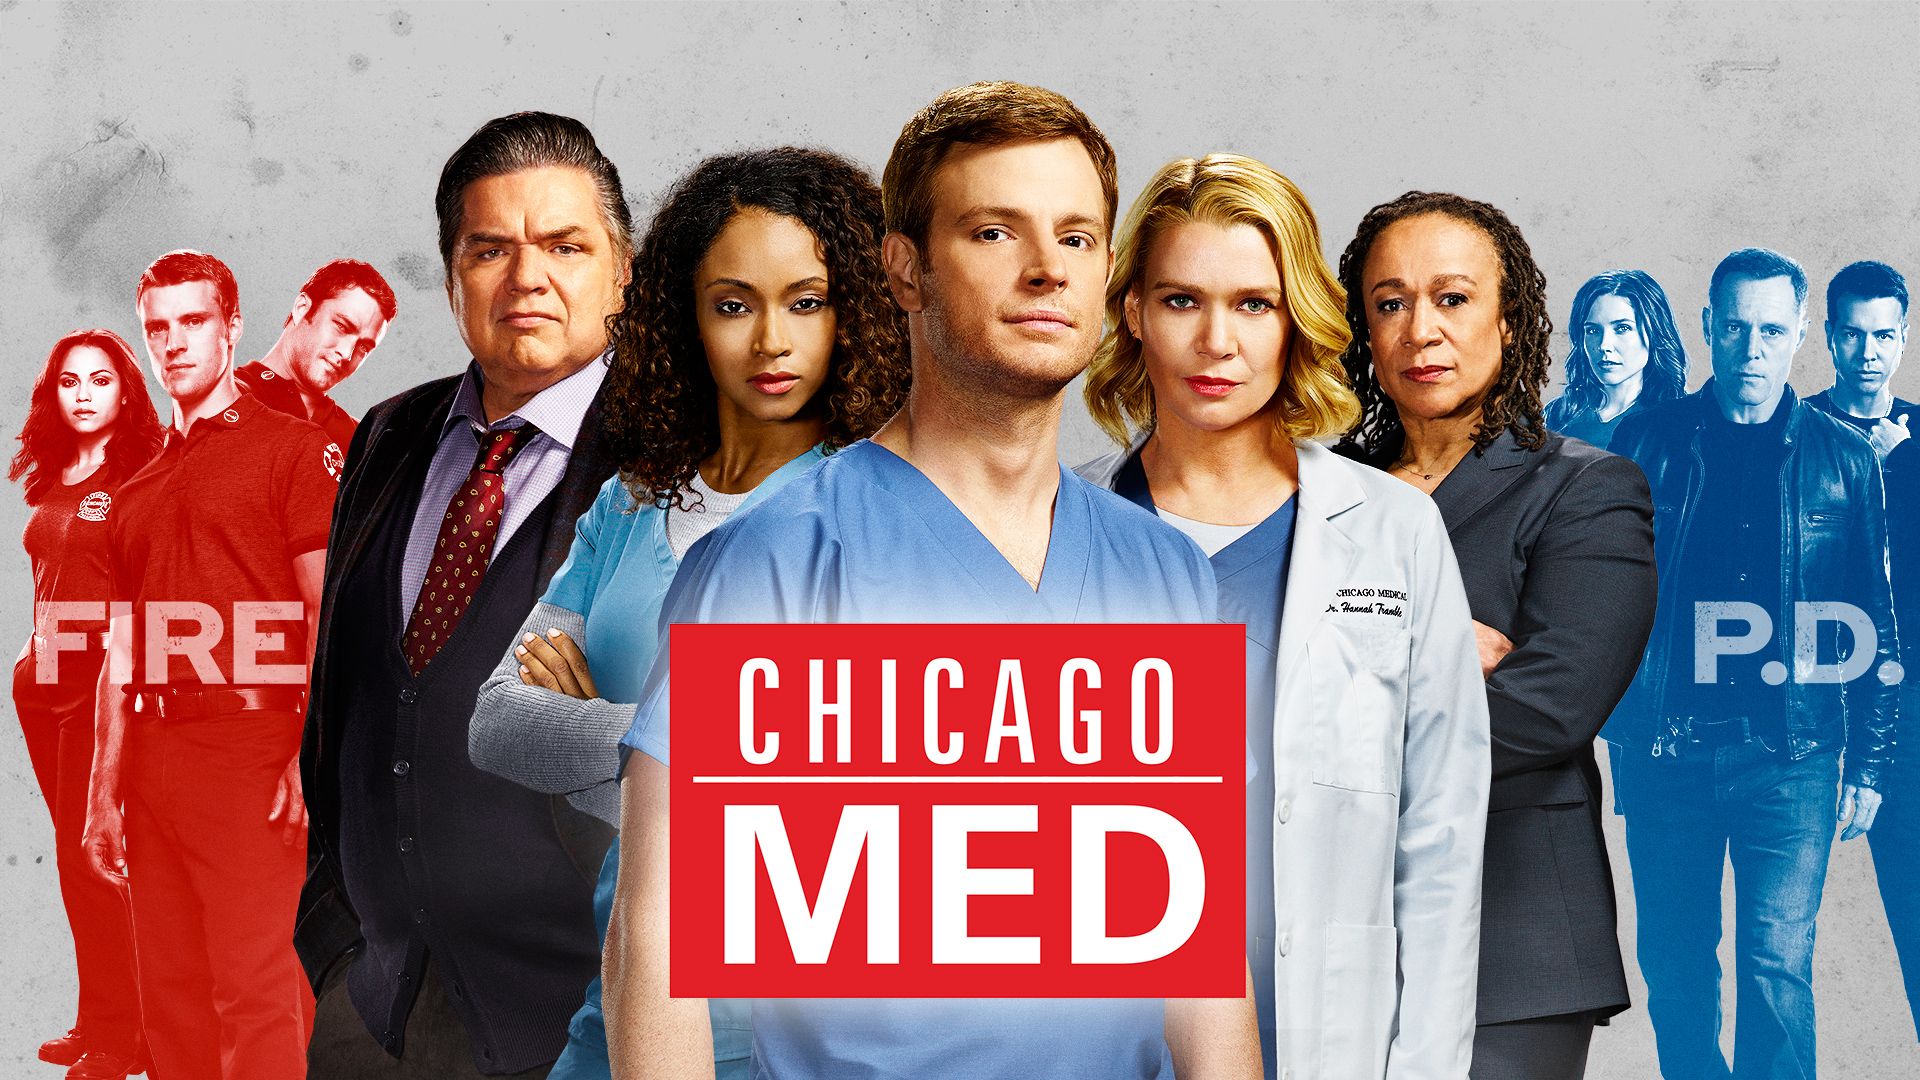 Chicago Med Wallpaper High Resolution and Quality Download